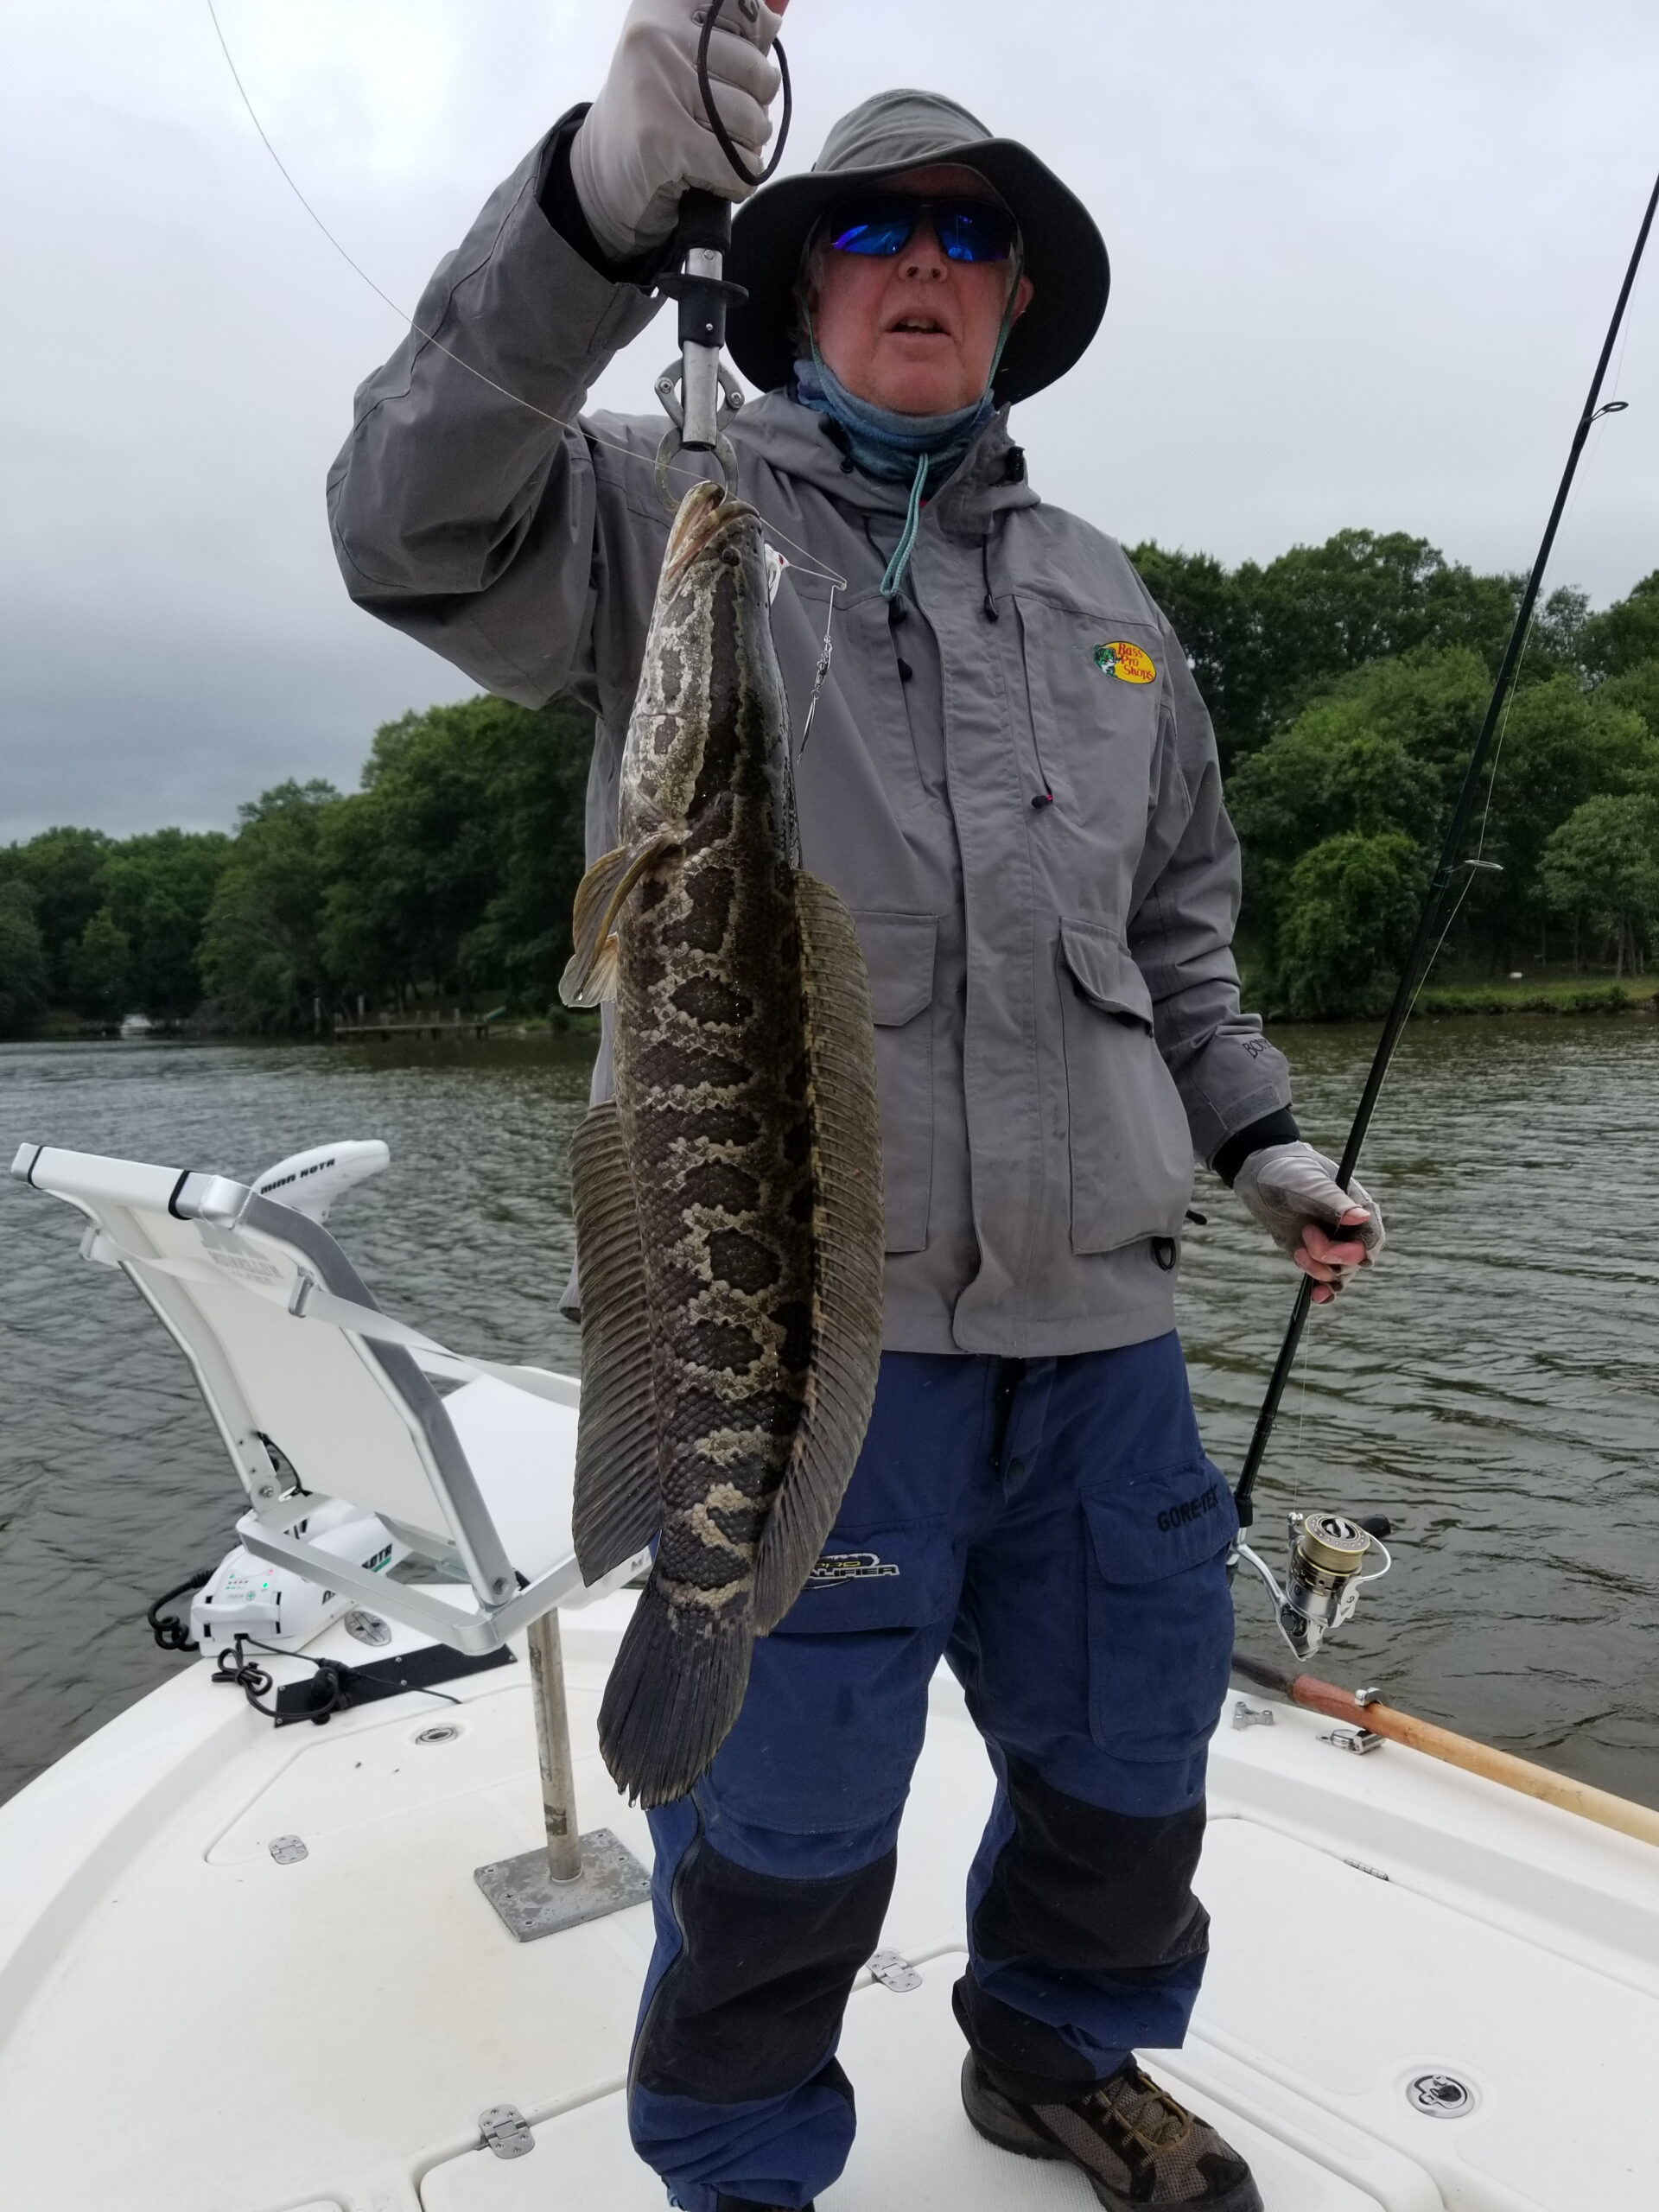 https://indianheadcharters.com/wp-content/uploads/2020/06/6-17-20-1-scaled.jpg